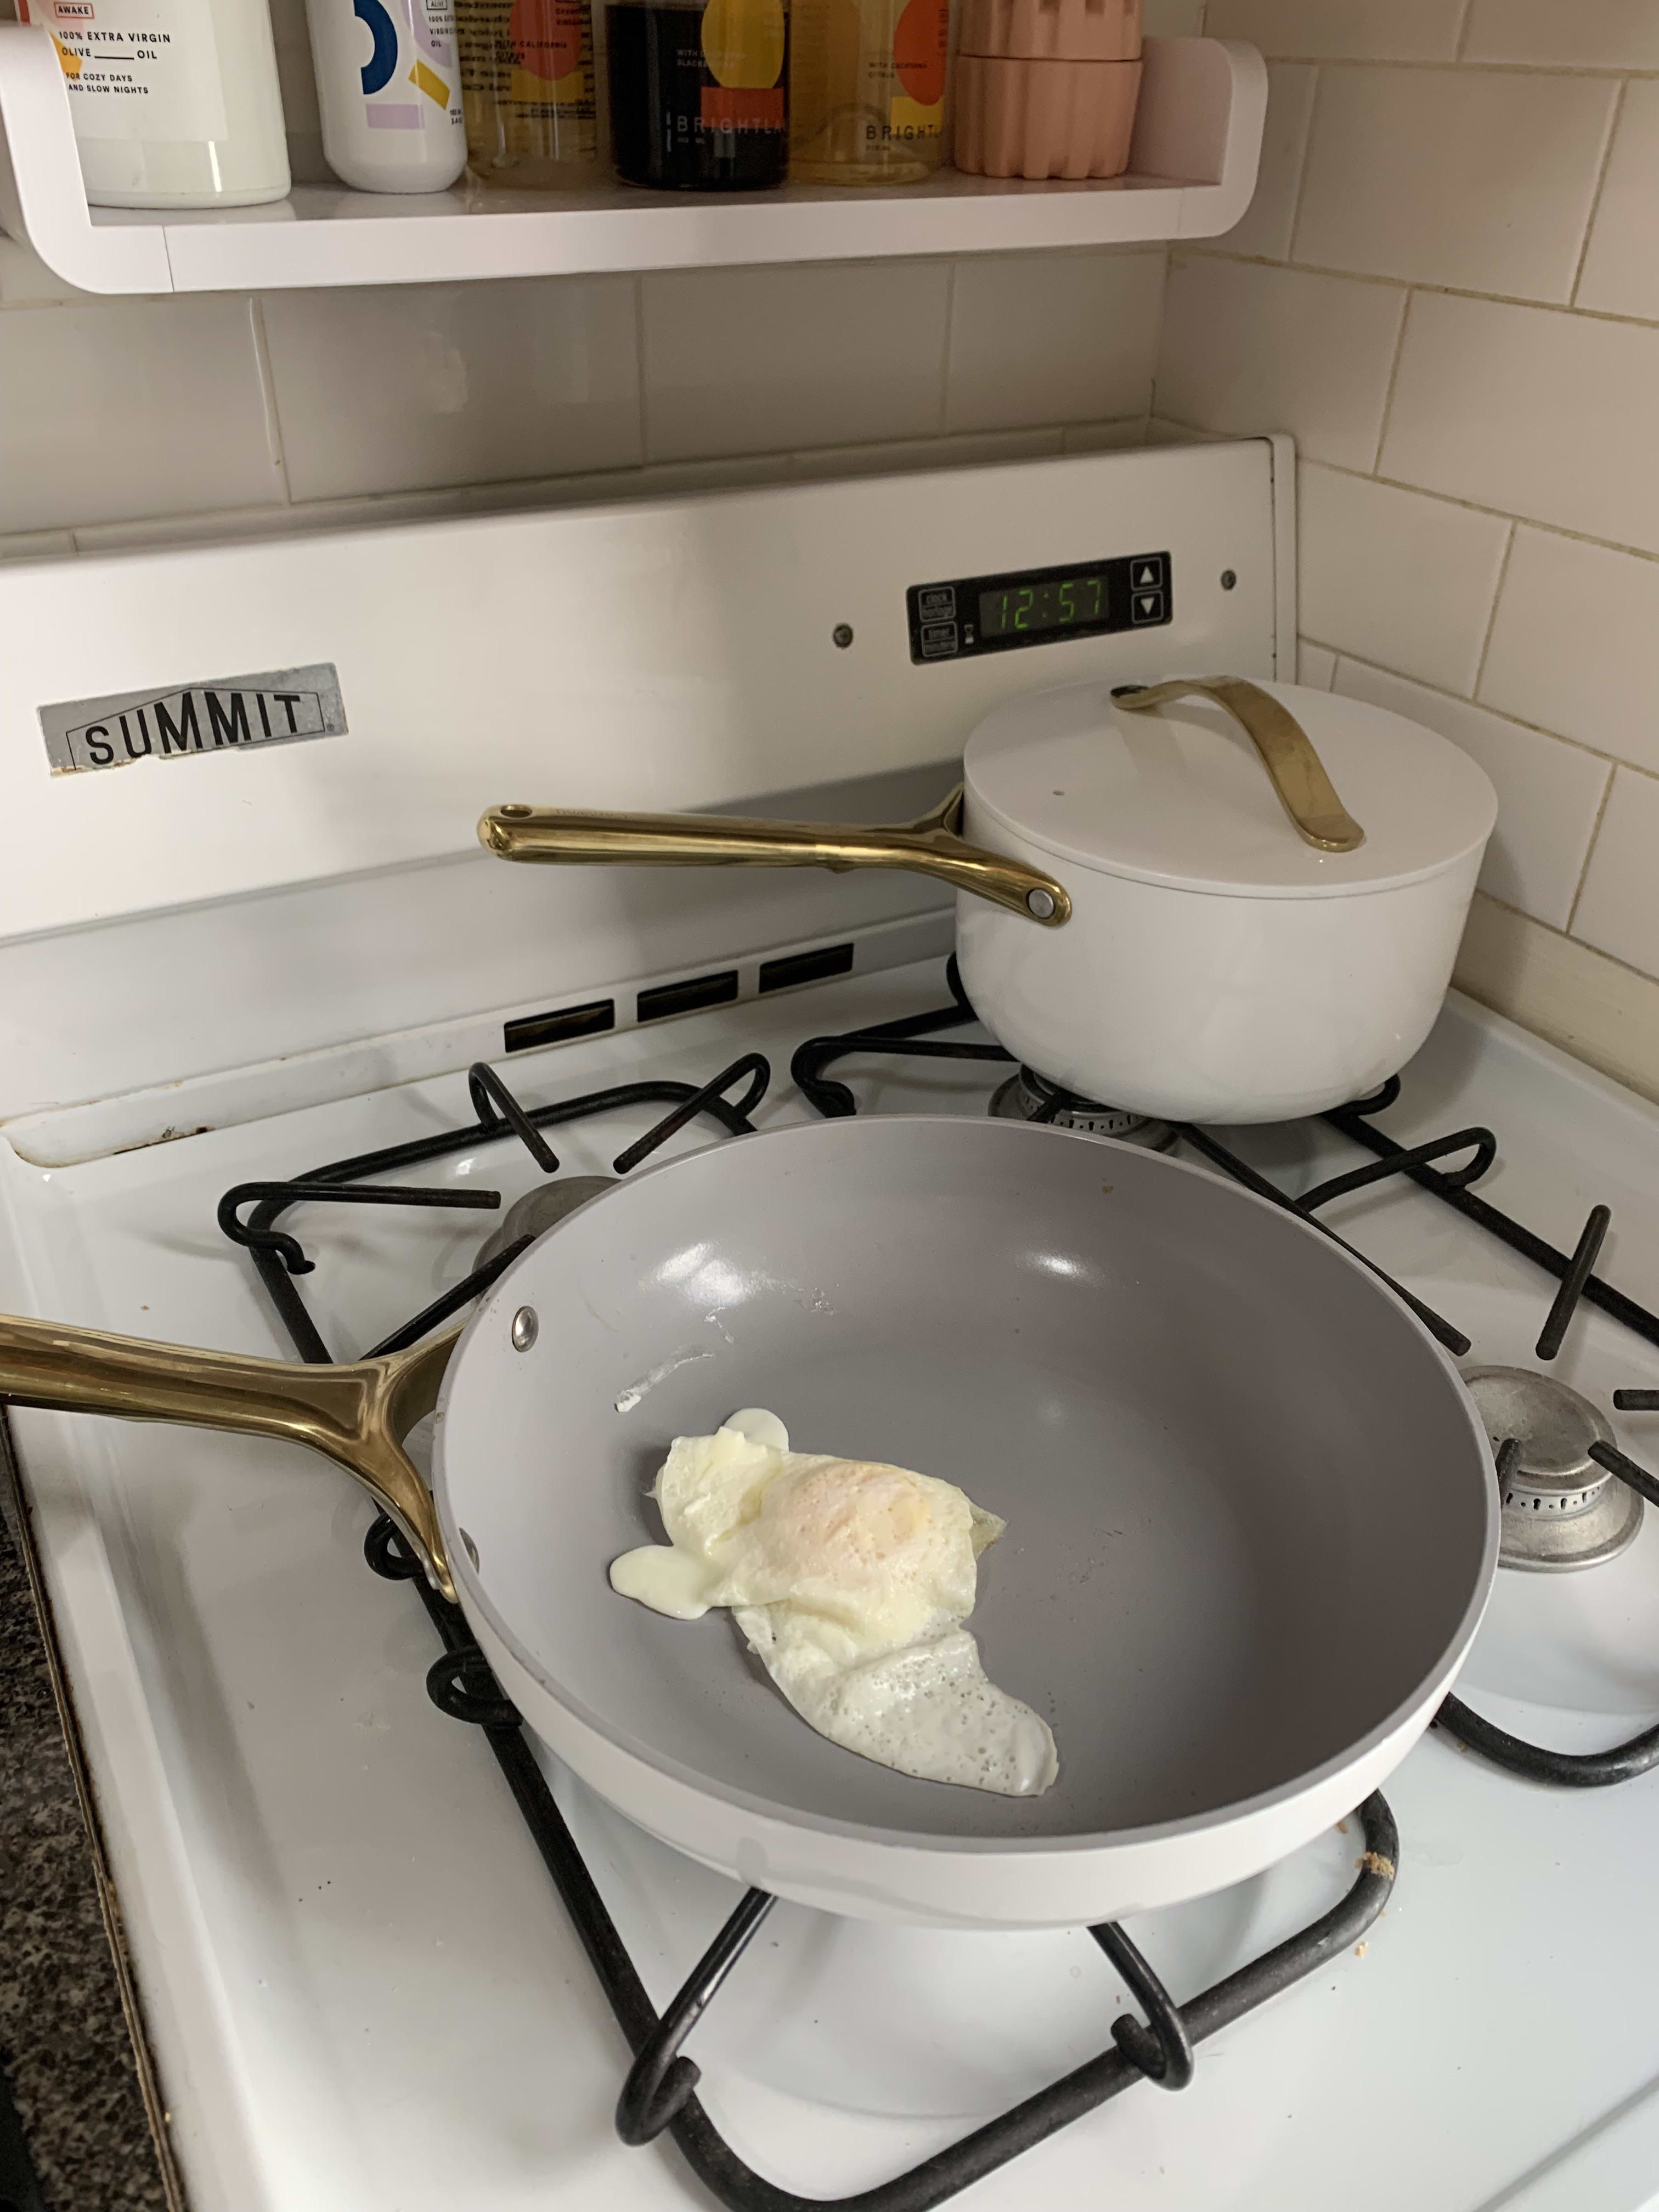 https://cdn.apartmenttherapy.info/image/upload/v1660928446/commerce/caraway-iconics-review-fry-pan.jpg